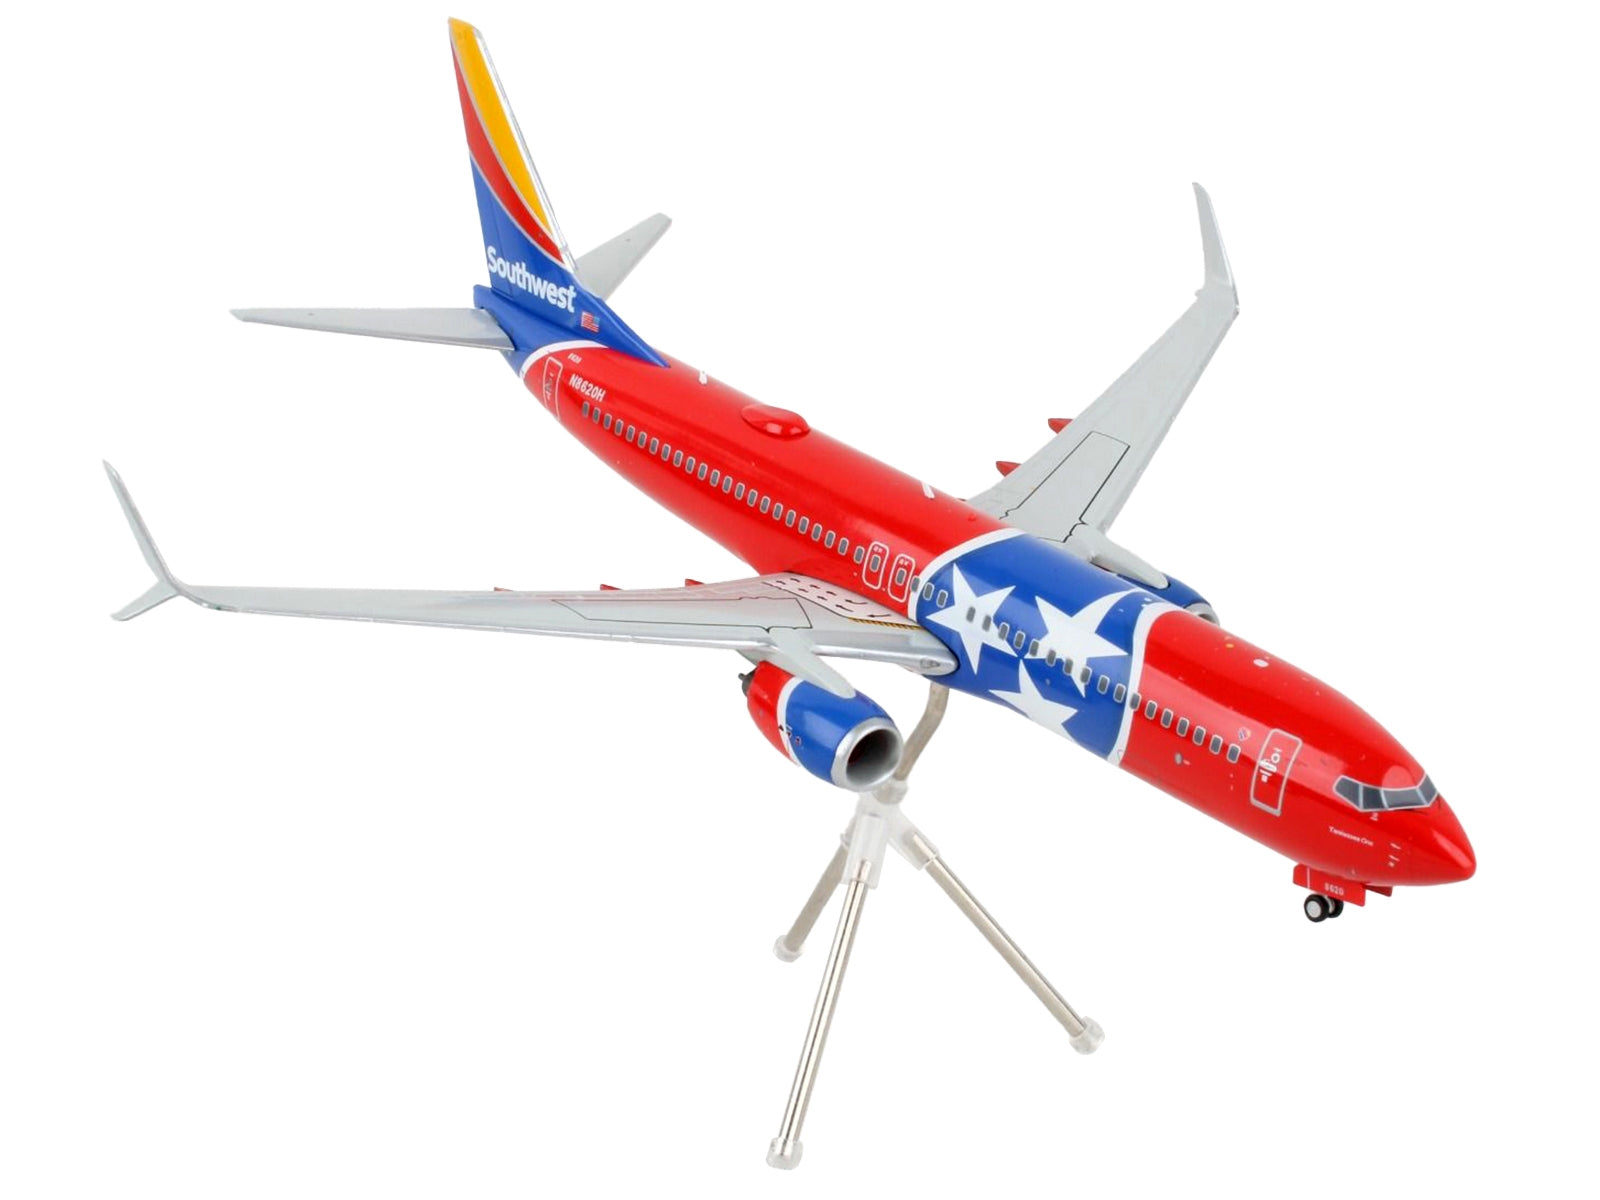 Boeing 737-800 Commercial Aircraft "Southwest Airlines - Tennessee One"